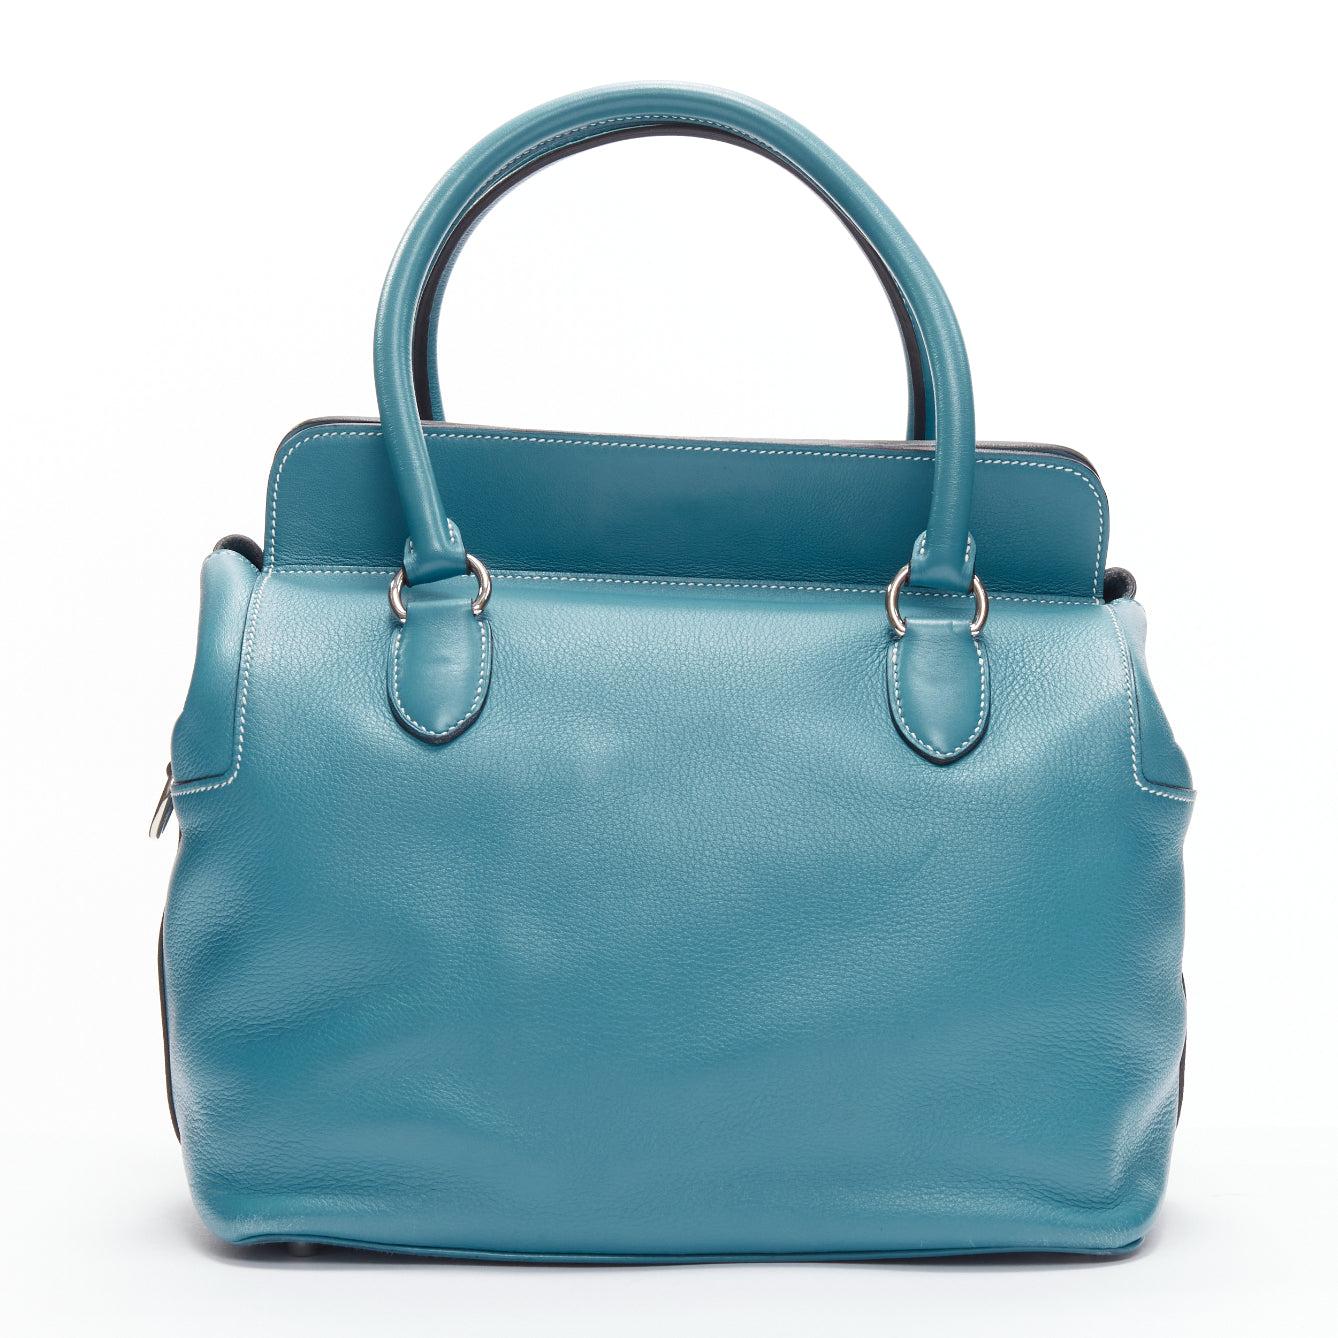 Women's HERMES Toolbox 26 teal blue grained leather SHW top handle satchel